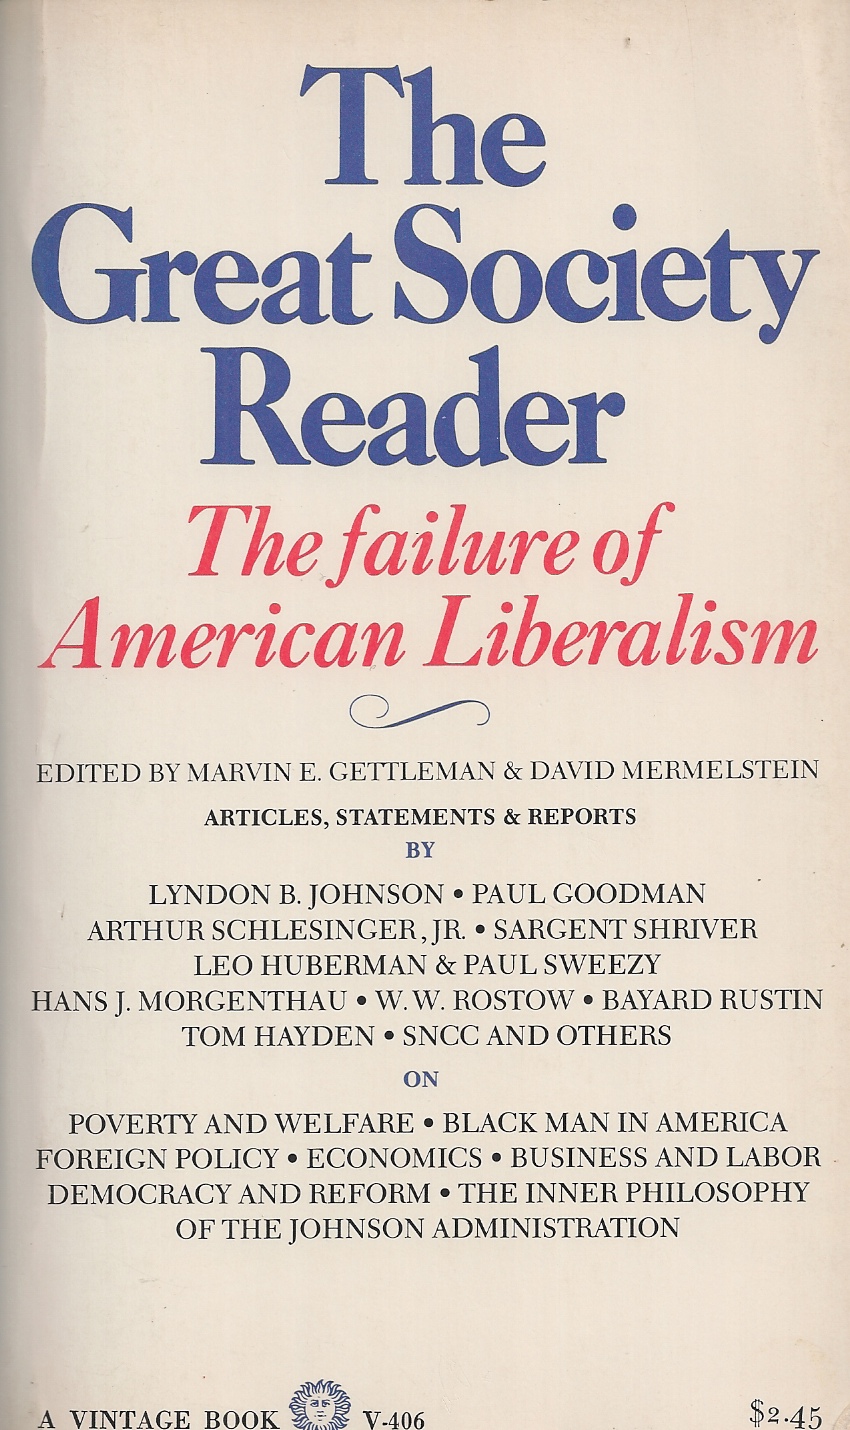 GETTLEMAN MARVIN E. , DAVID MERMELSTEIN - Great Society Reader the Failure of American Liberalism, Articles, Statements, & Reports